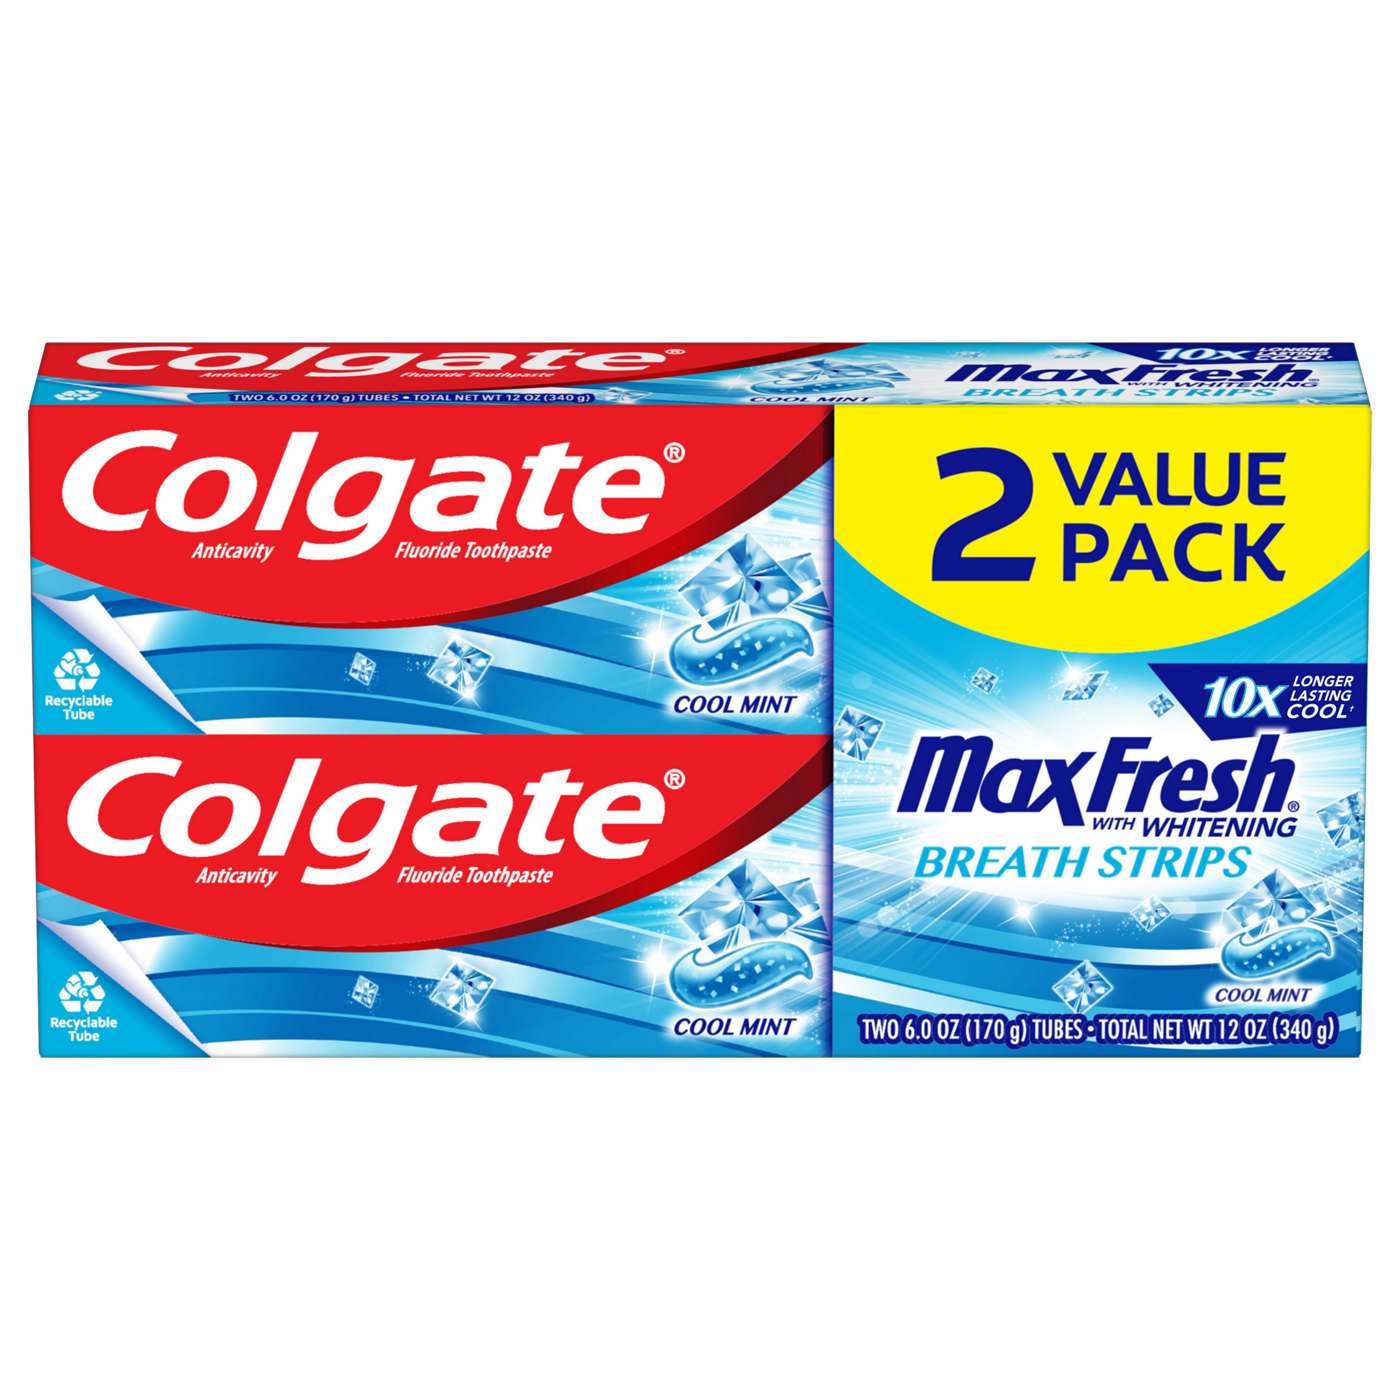 Colgate Max Fresh Anticavity Toothpaste 2 pk - Cool Mint; image 1 of 14